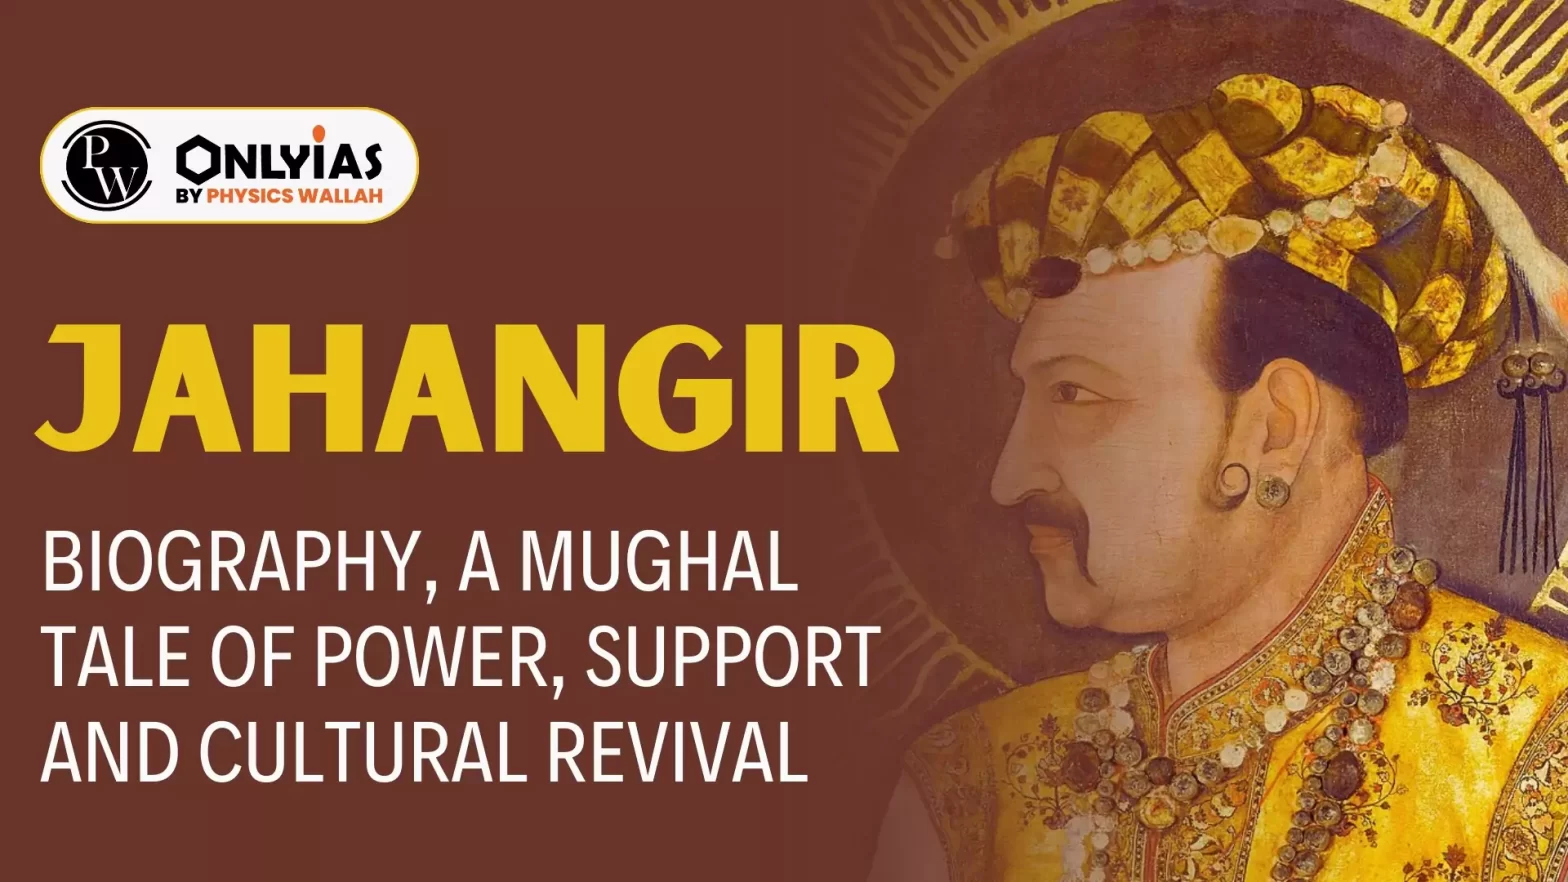 Jahangir: Biography, A Mughal Tale of Power, Support and Cultural Revival